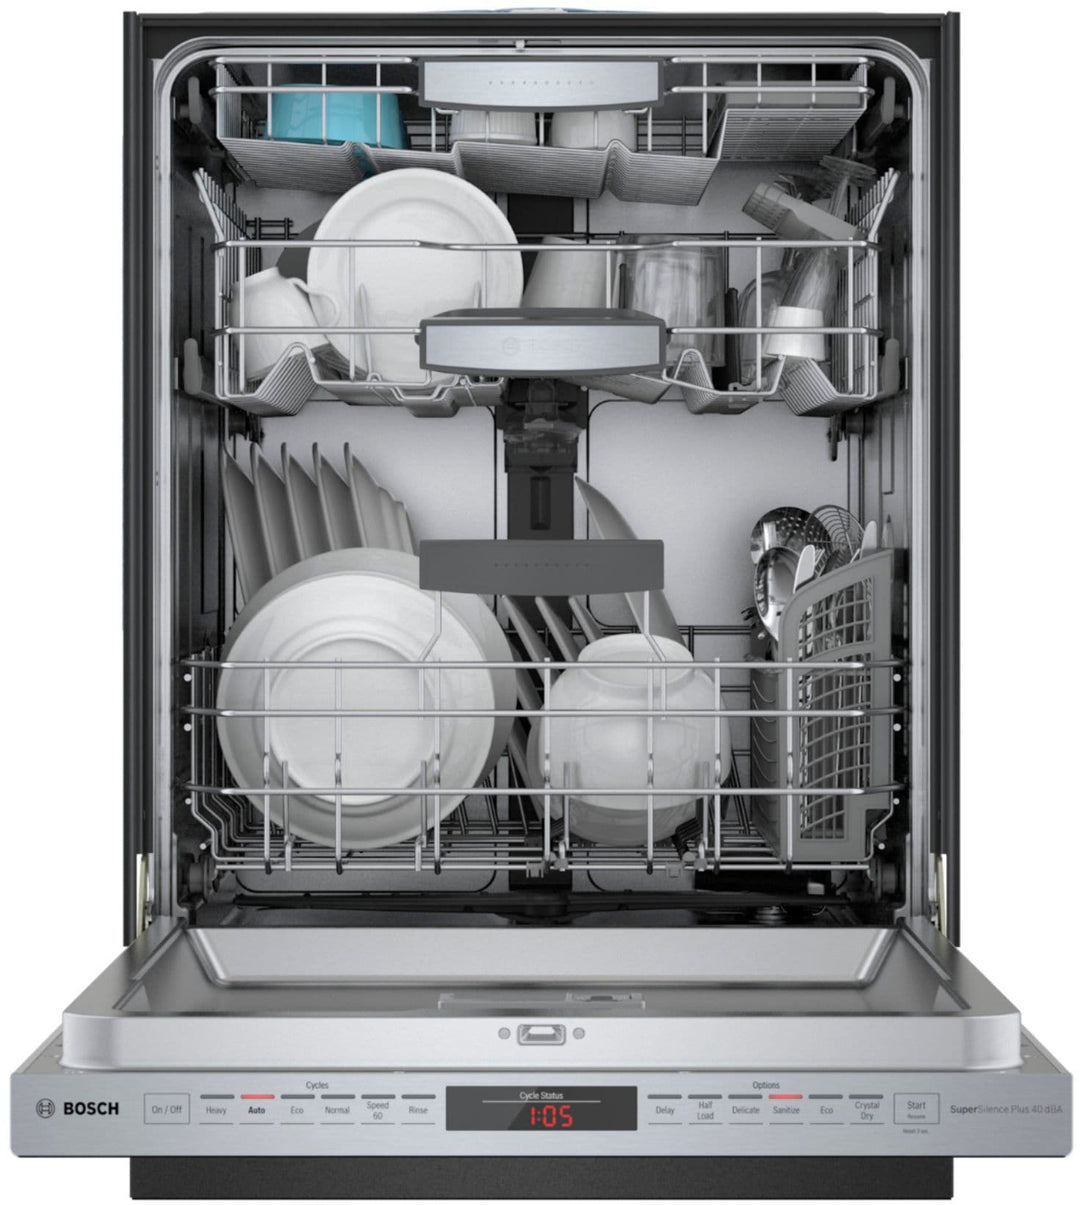 Bosch - 800 Series 24" Top Control Built-In Dishwasher with CrystalDry, Stainless Steel Tub, 3rd Rack, 40 dBa - Stainless steel_6